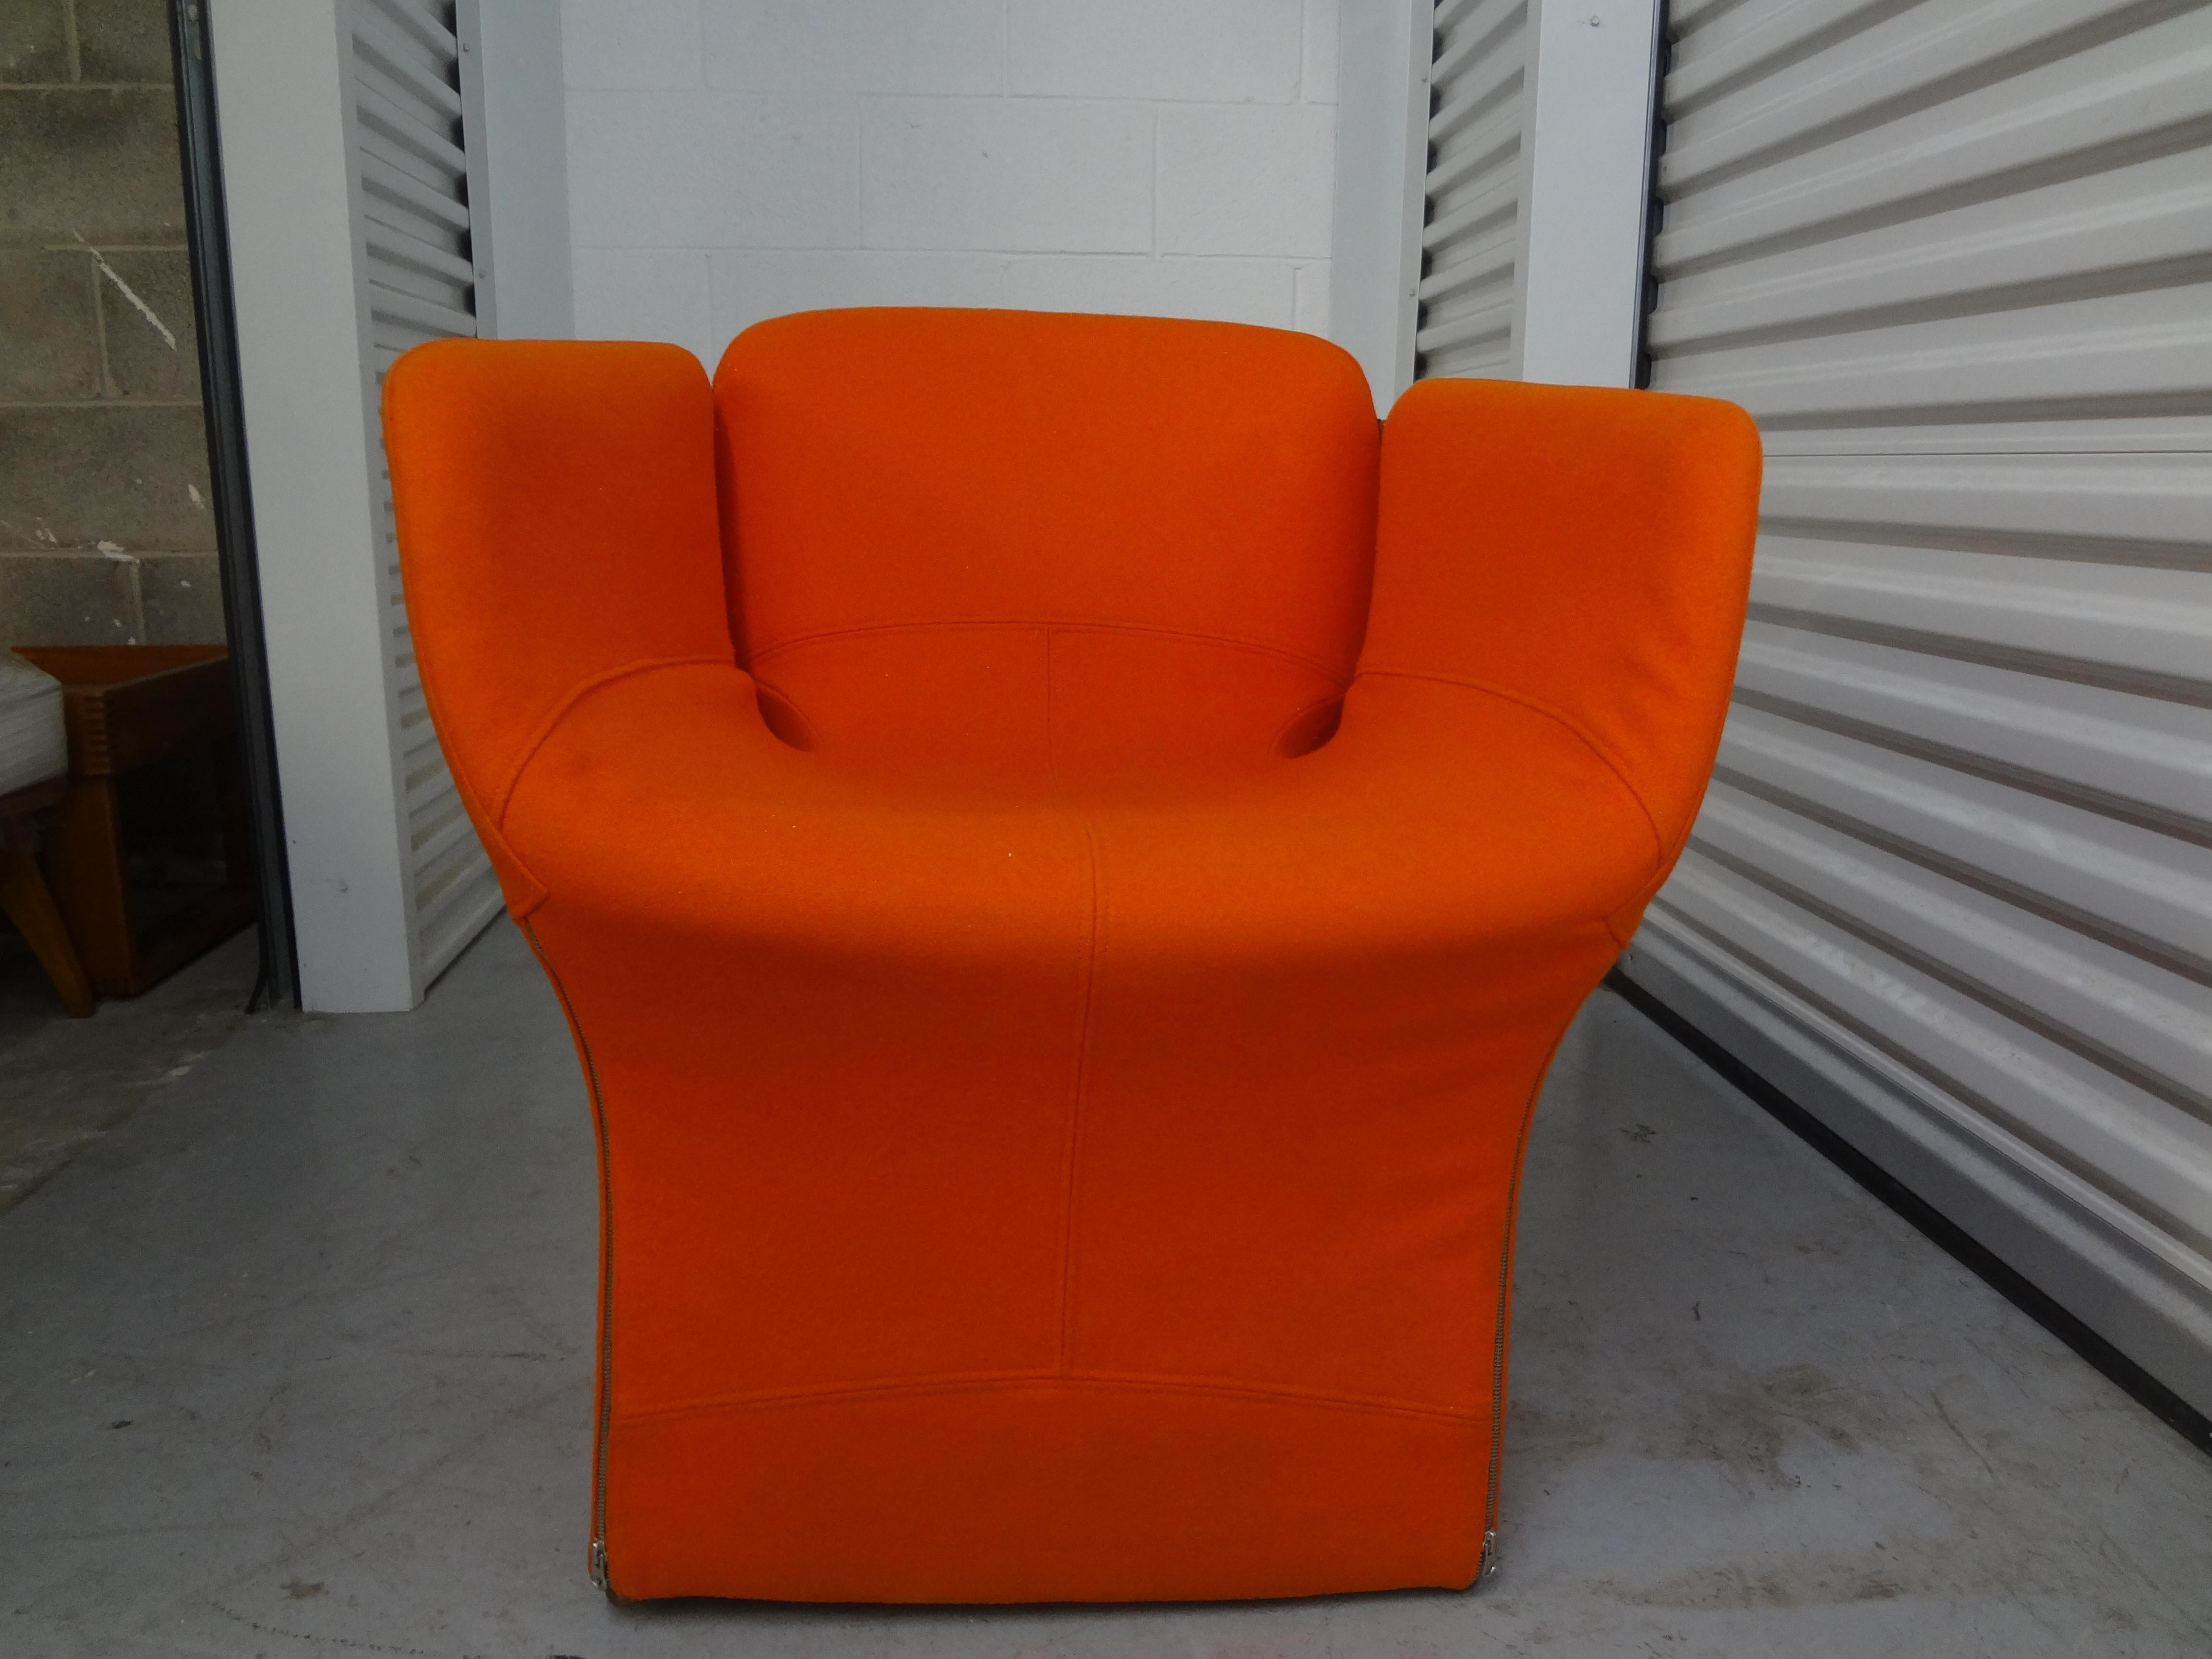 Pair Of Italian Modern Chairs By Ron Arad For Moroso.
Great pair of Italian modern chairs, club chairs, lounge chairs or side chairs were designed by Ron Arad for Moroso. These comfortable chairs retain their original orange wood upholstery which is